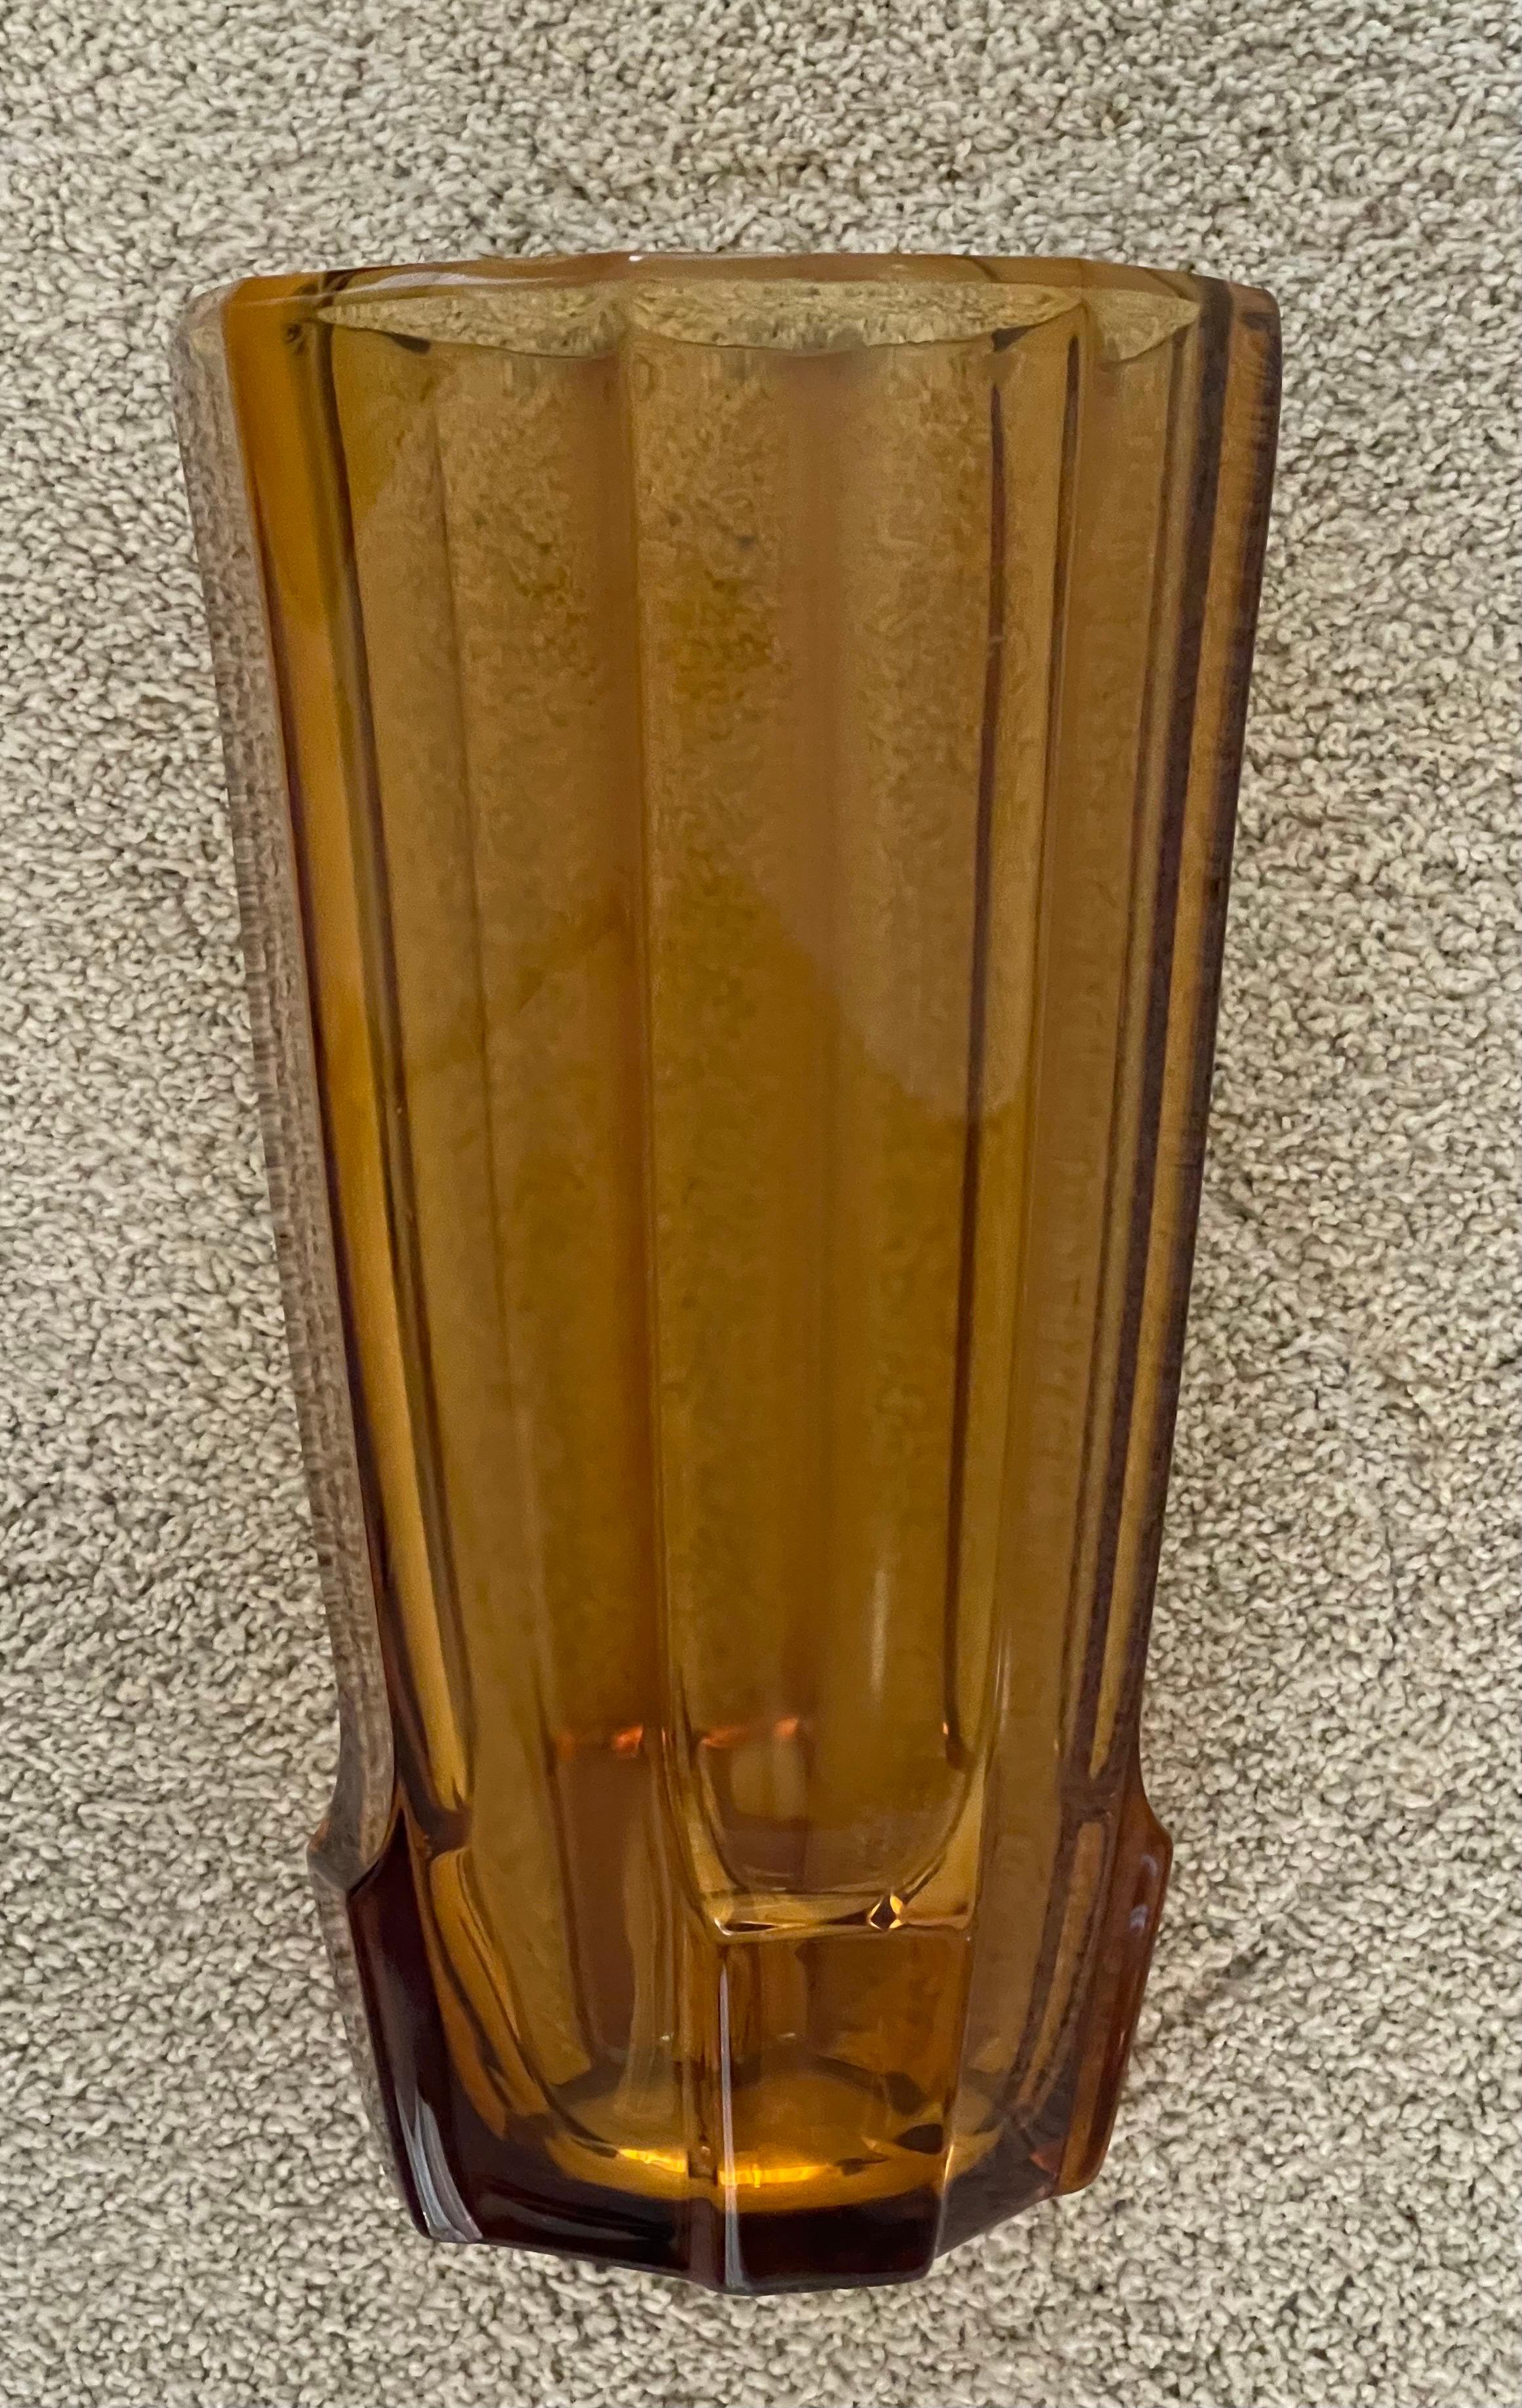 20th Century Large Art Deco Art Glass Faceted Vase by Josef Hoffmann for Moser Glassworks For Sale